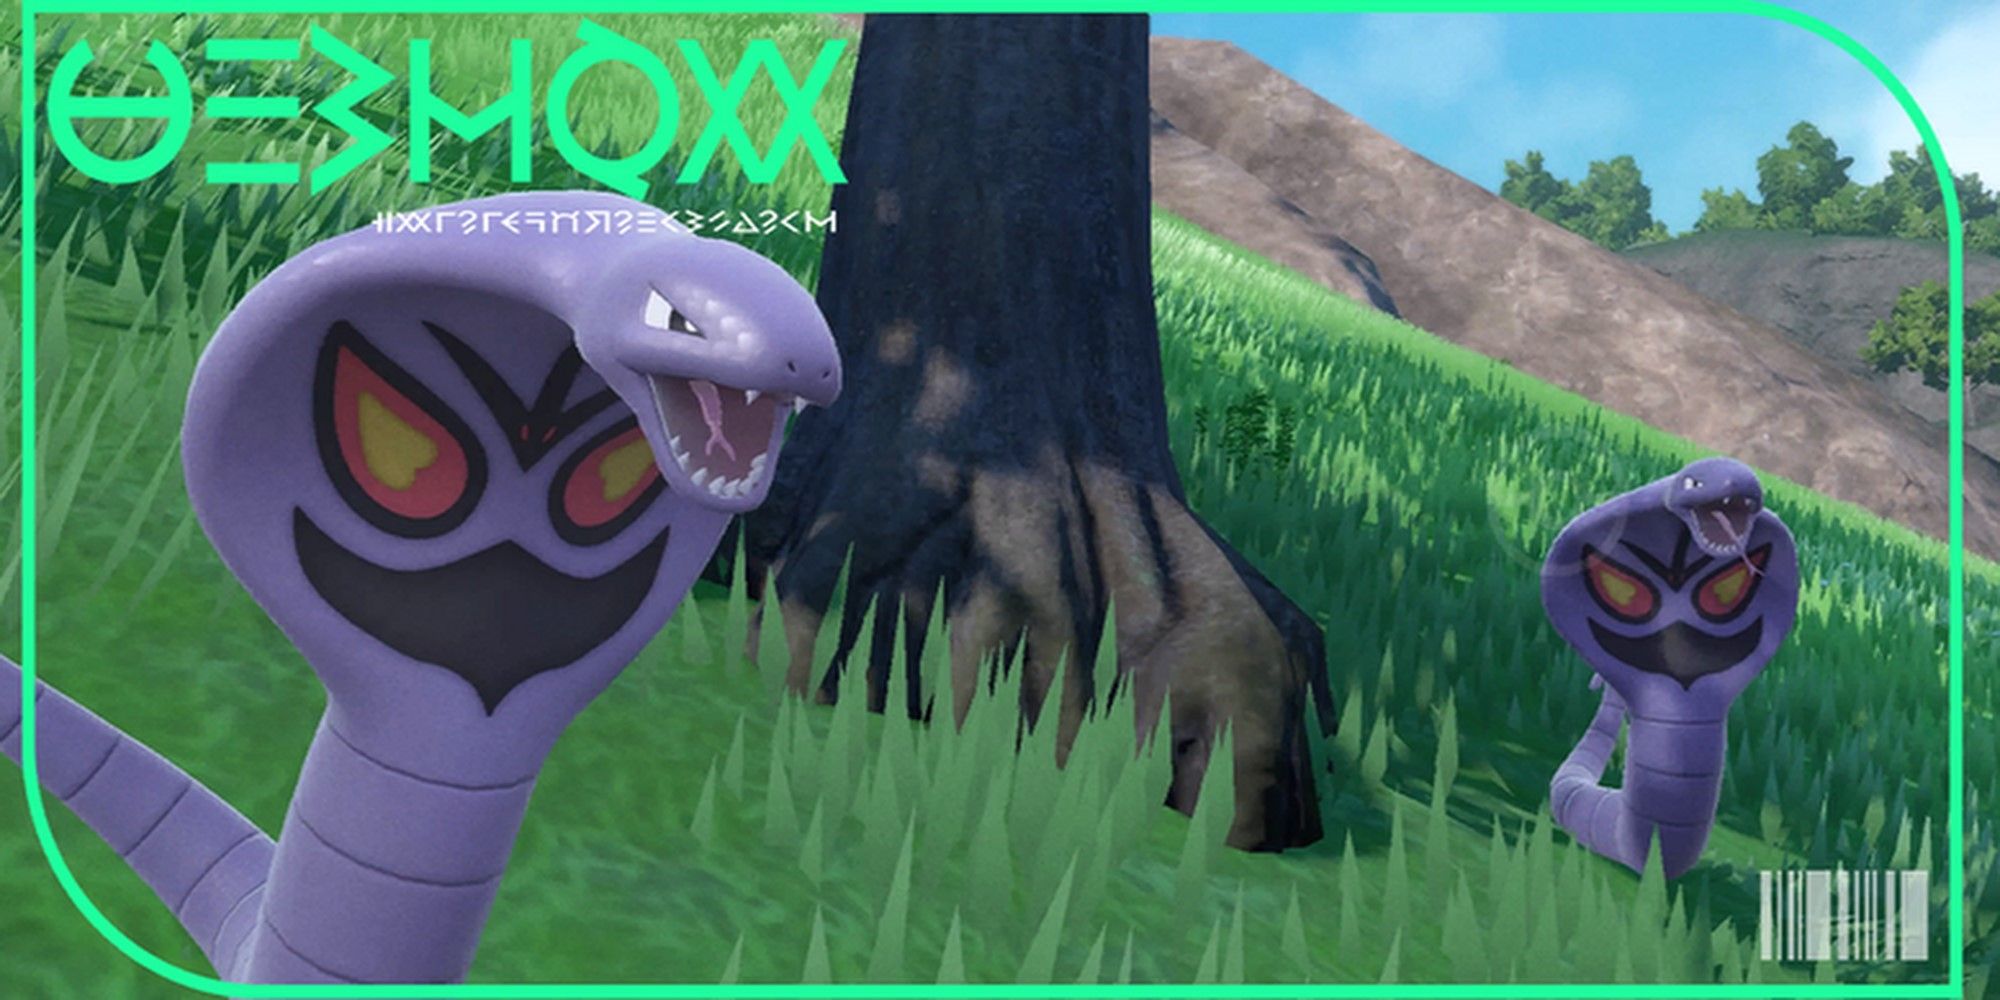 The cover image for Arbok's dex entry in paldea